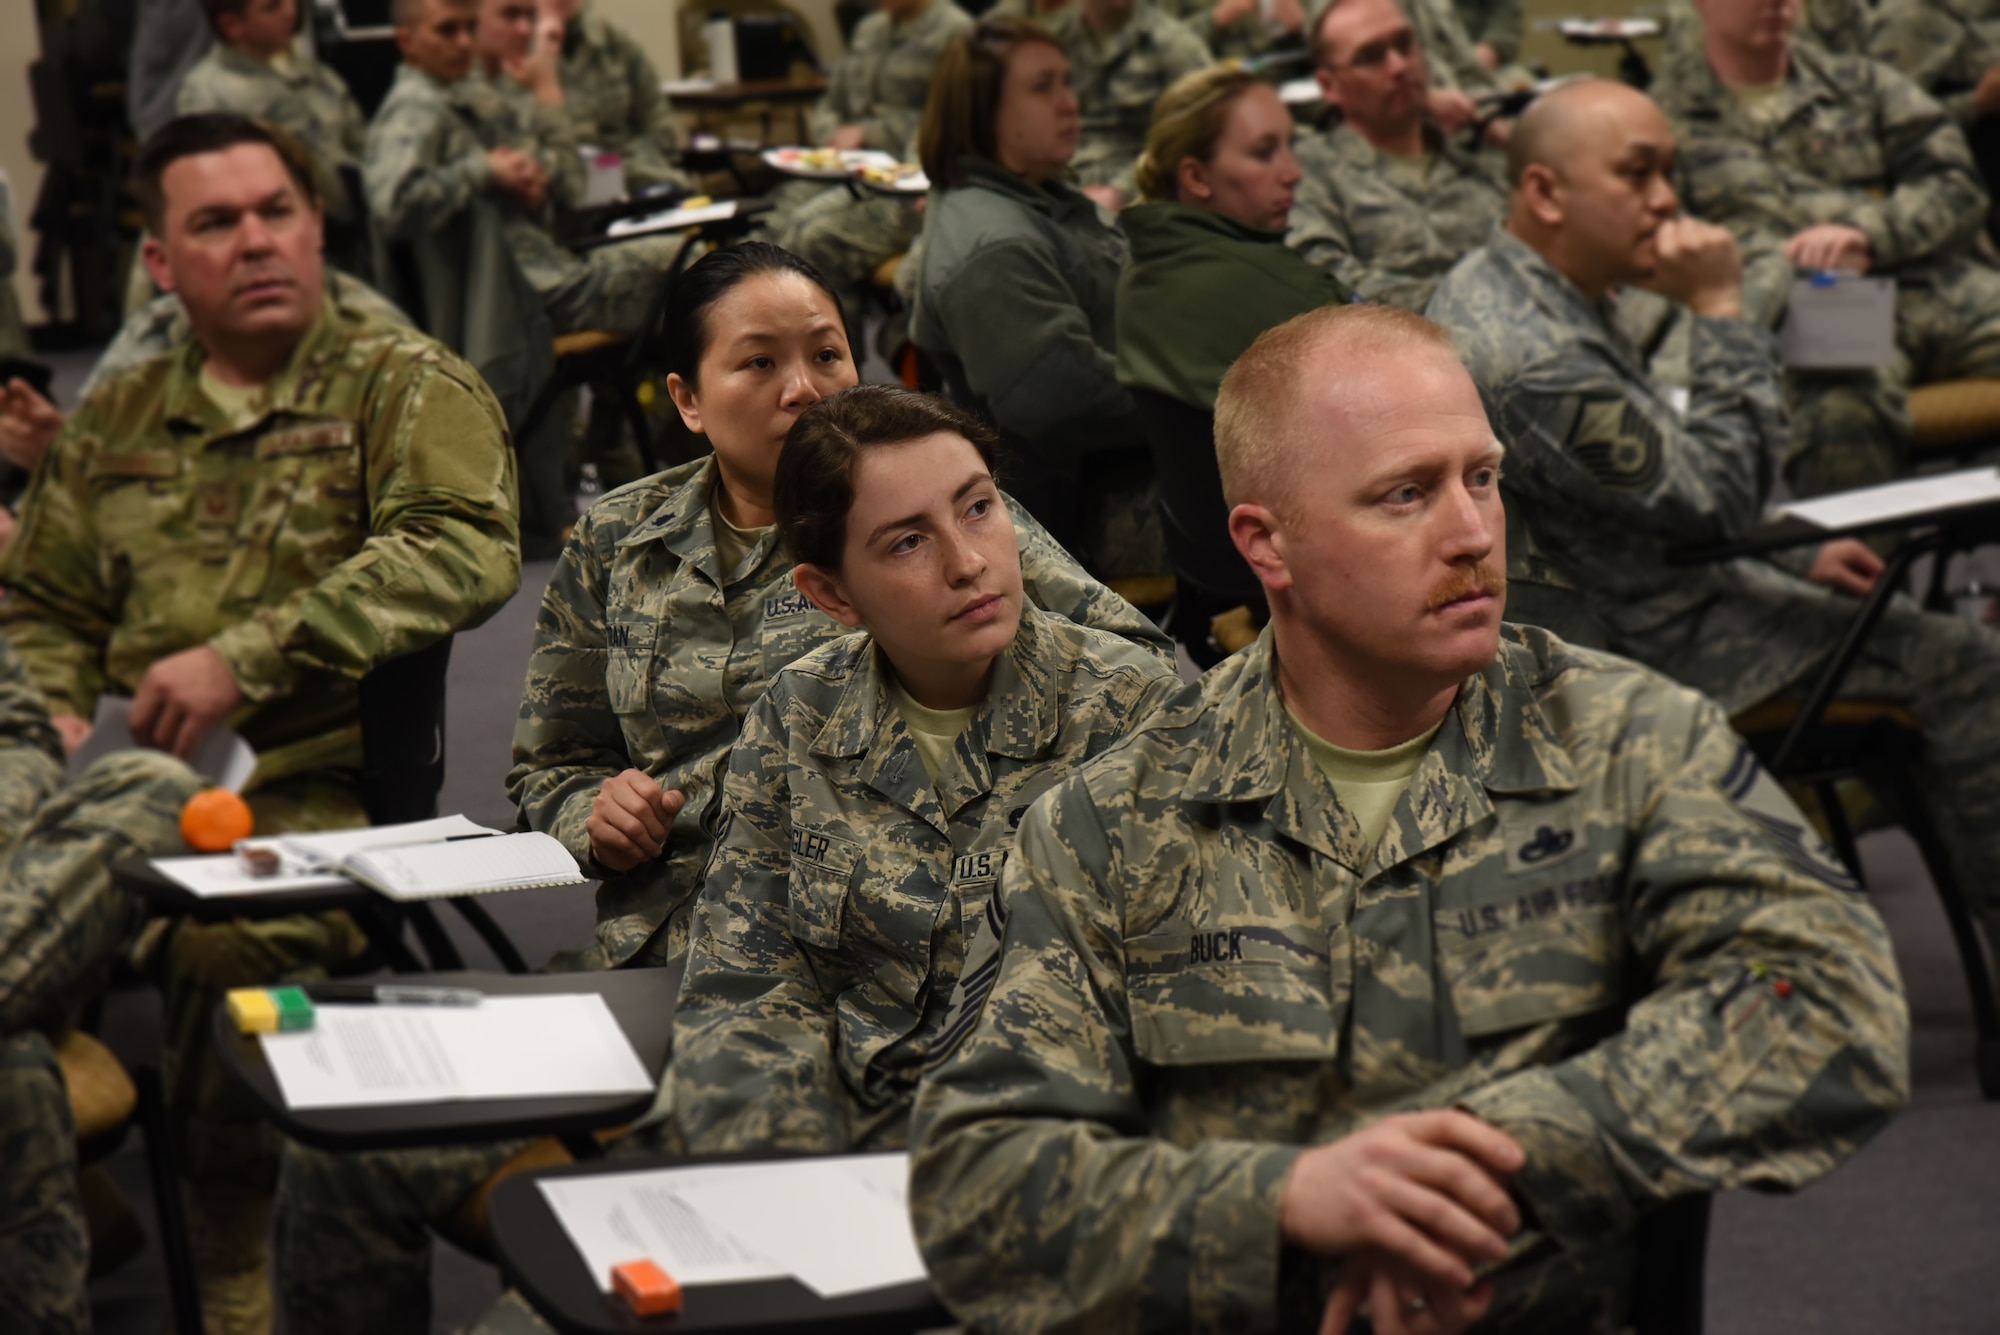 Members of the 142nd Fighter Wing, Oregon Air National Guard, take part in a focus group orchestrated by the Air Force Chief of Staff to help give feedback on various areas to promote best practices and identify improvements, Portland Air National Guard Base, Ore. April 1, 2017. (U.S. Air National Guard photo by Tech. Sgt. Aaron Perkins, 142nd Fighter Wing Public Affairs)